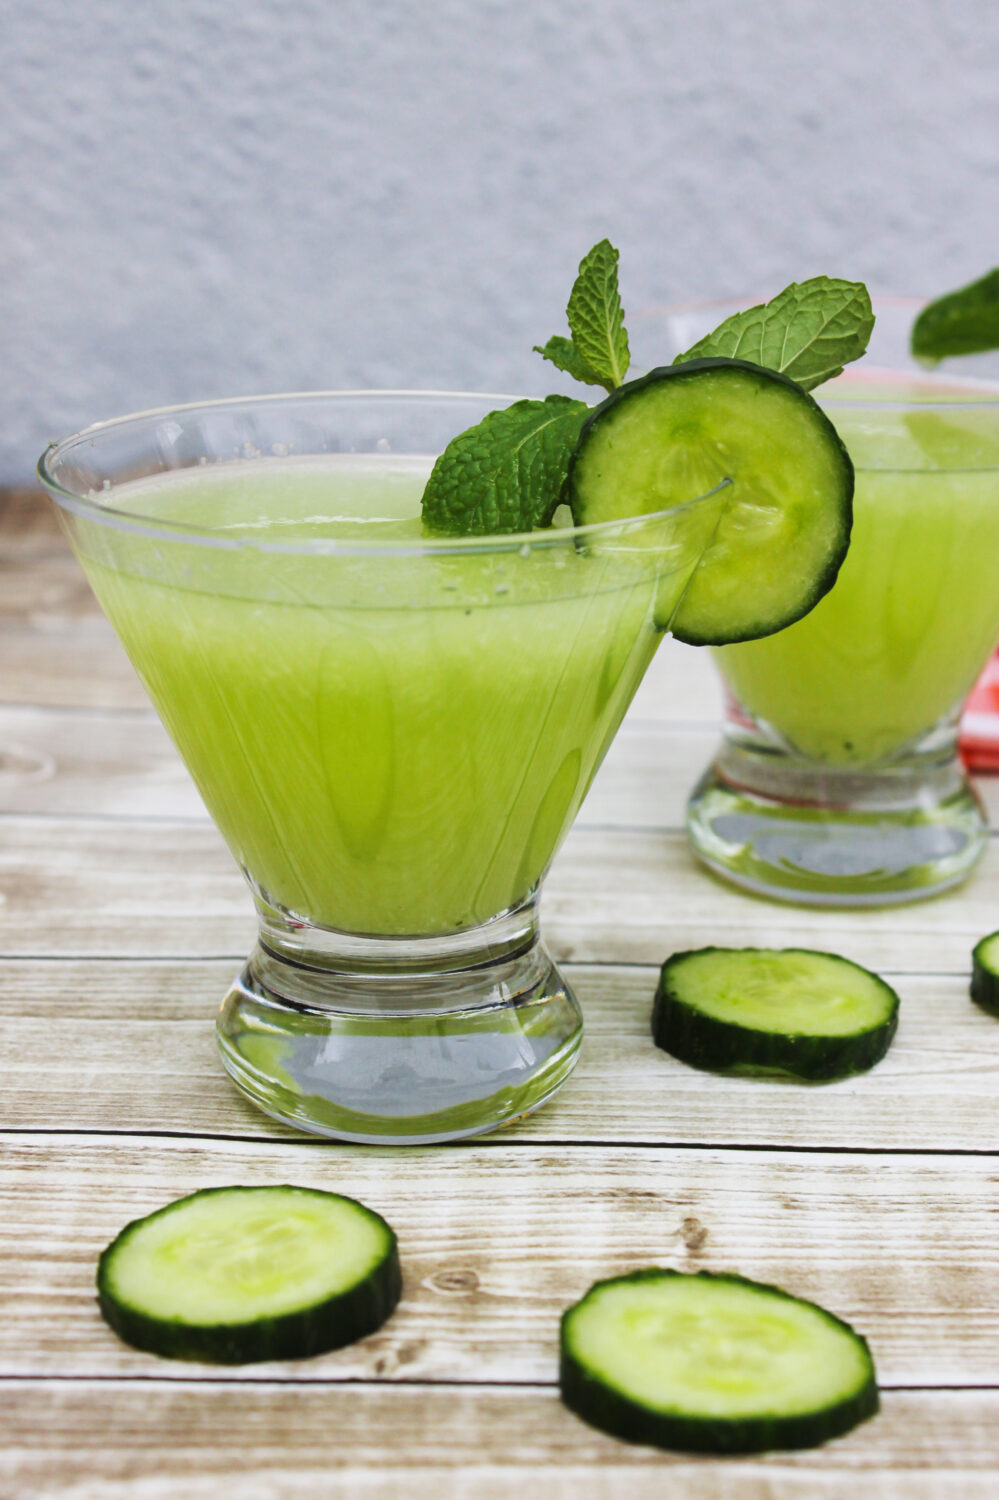 Yum! This cucumber mint martini looks amazing! It's the perfect spring cocktail, I'm totally bookmarking it as one of my must make cocktail recipes!